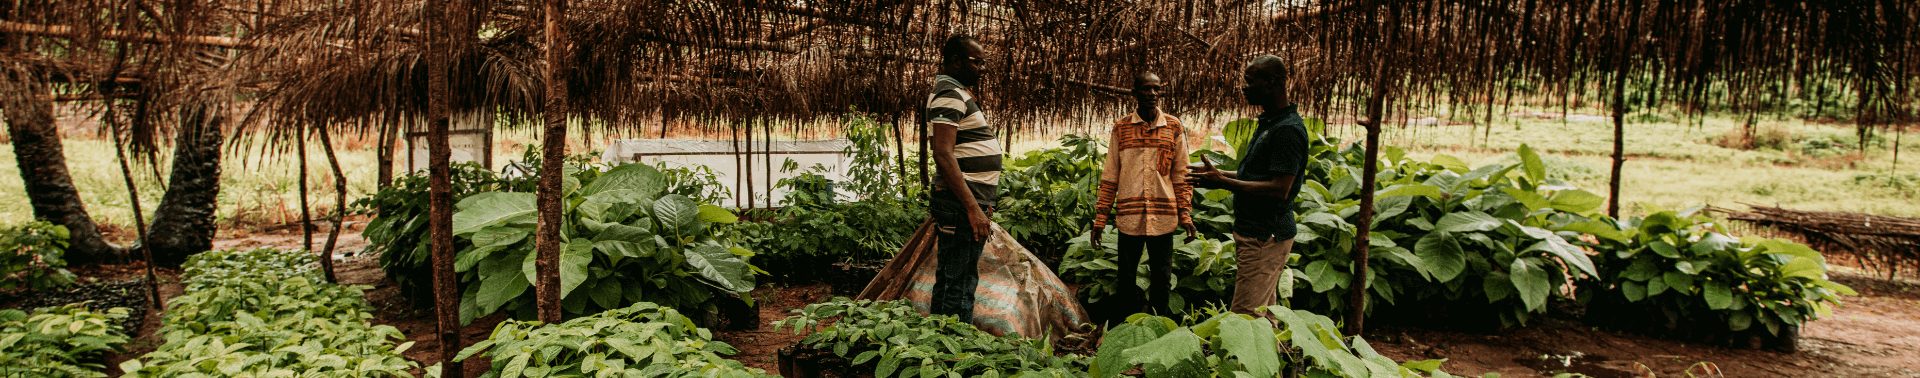 Transparence Cacao’s cocoa & forest initiative 2018-2019 report